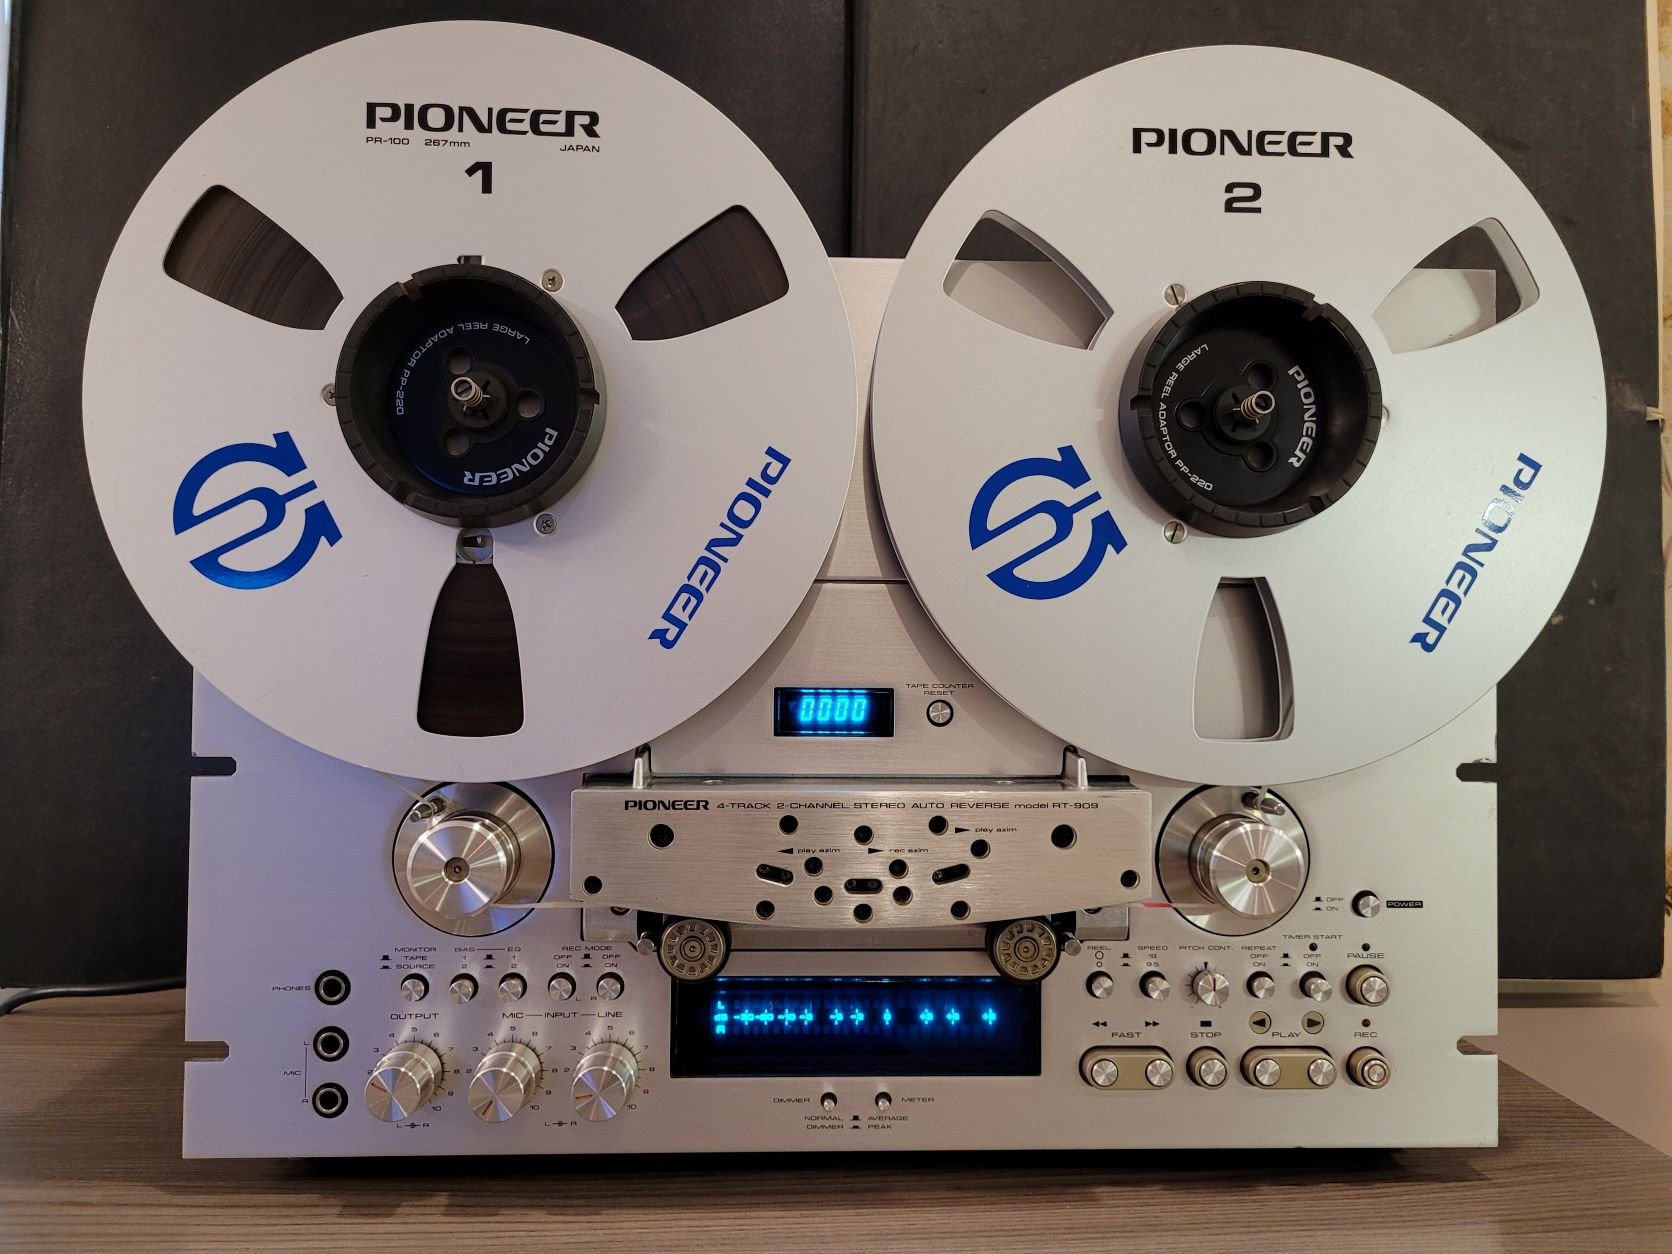 Reel to reel - The peak of audio quality and sophistication